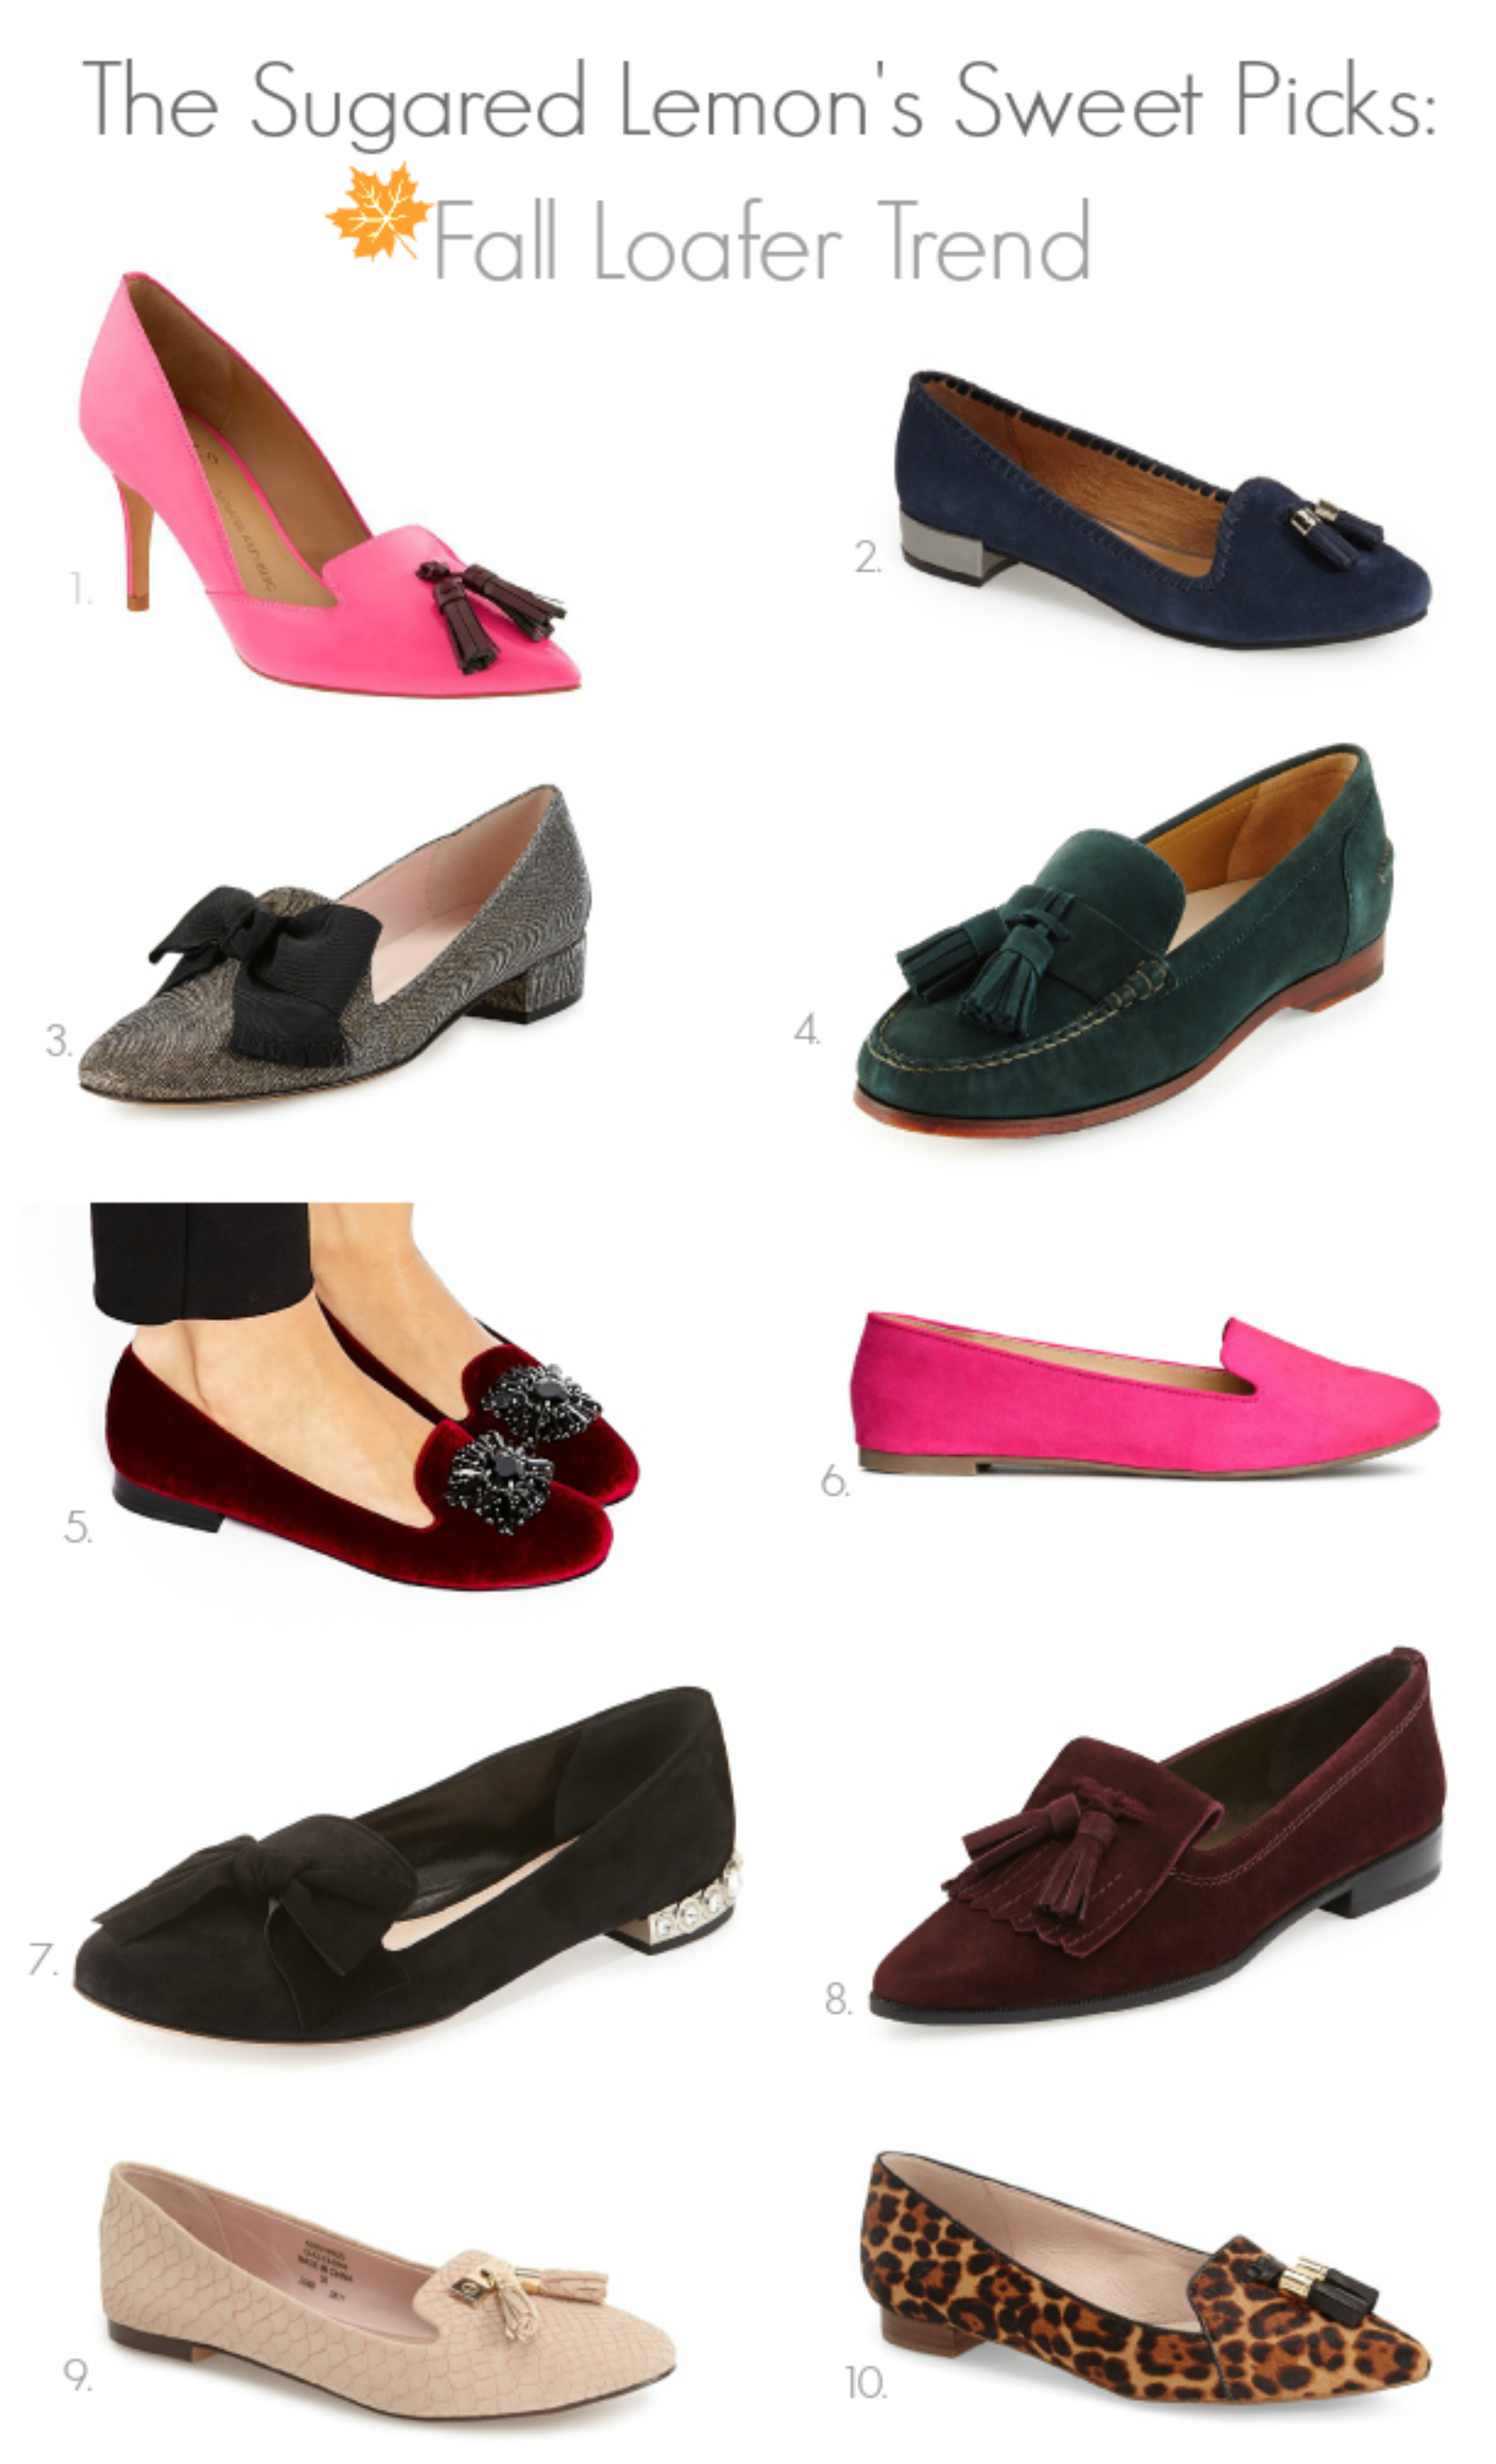 Fall 2015 Lady Loafer Trend